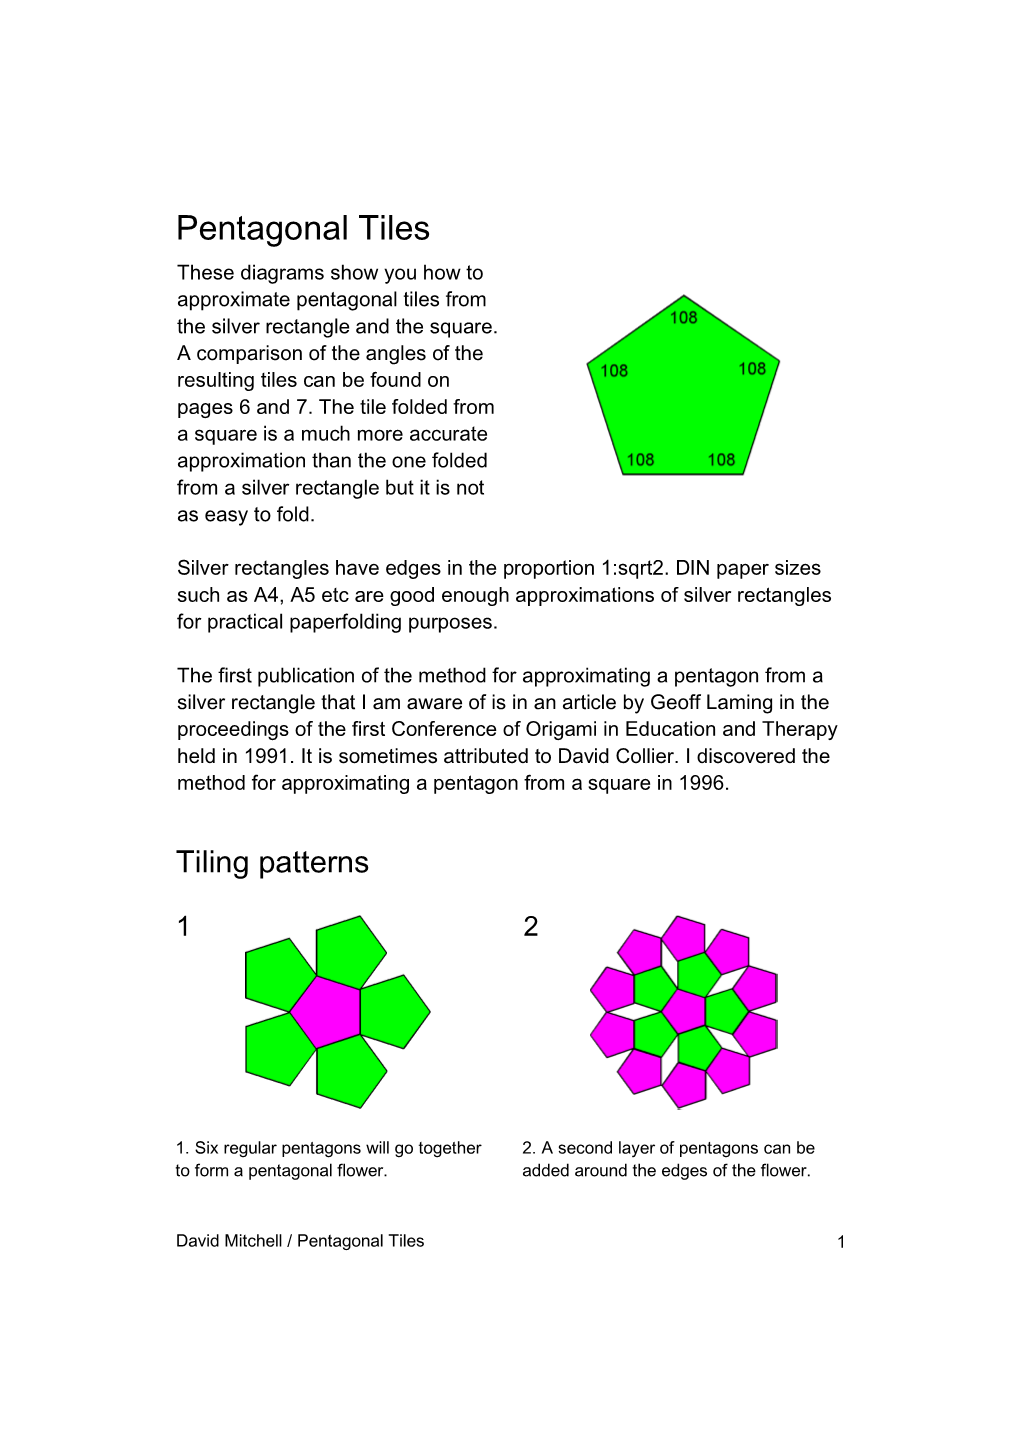 Pentagonal Tiles These Diagrams Show You How to Approximate Pentagonal Tiles from the Silver Rectangle and the Square